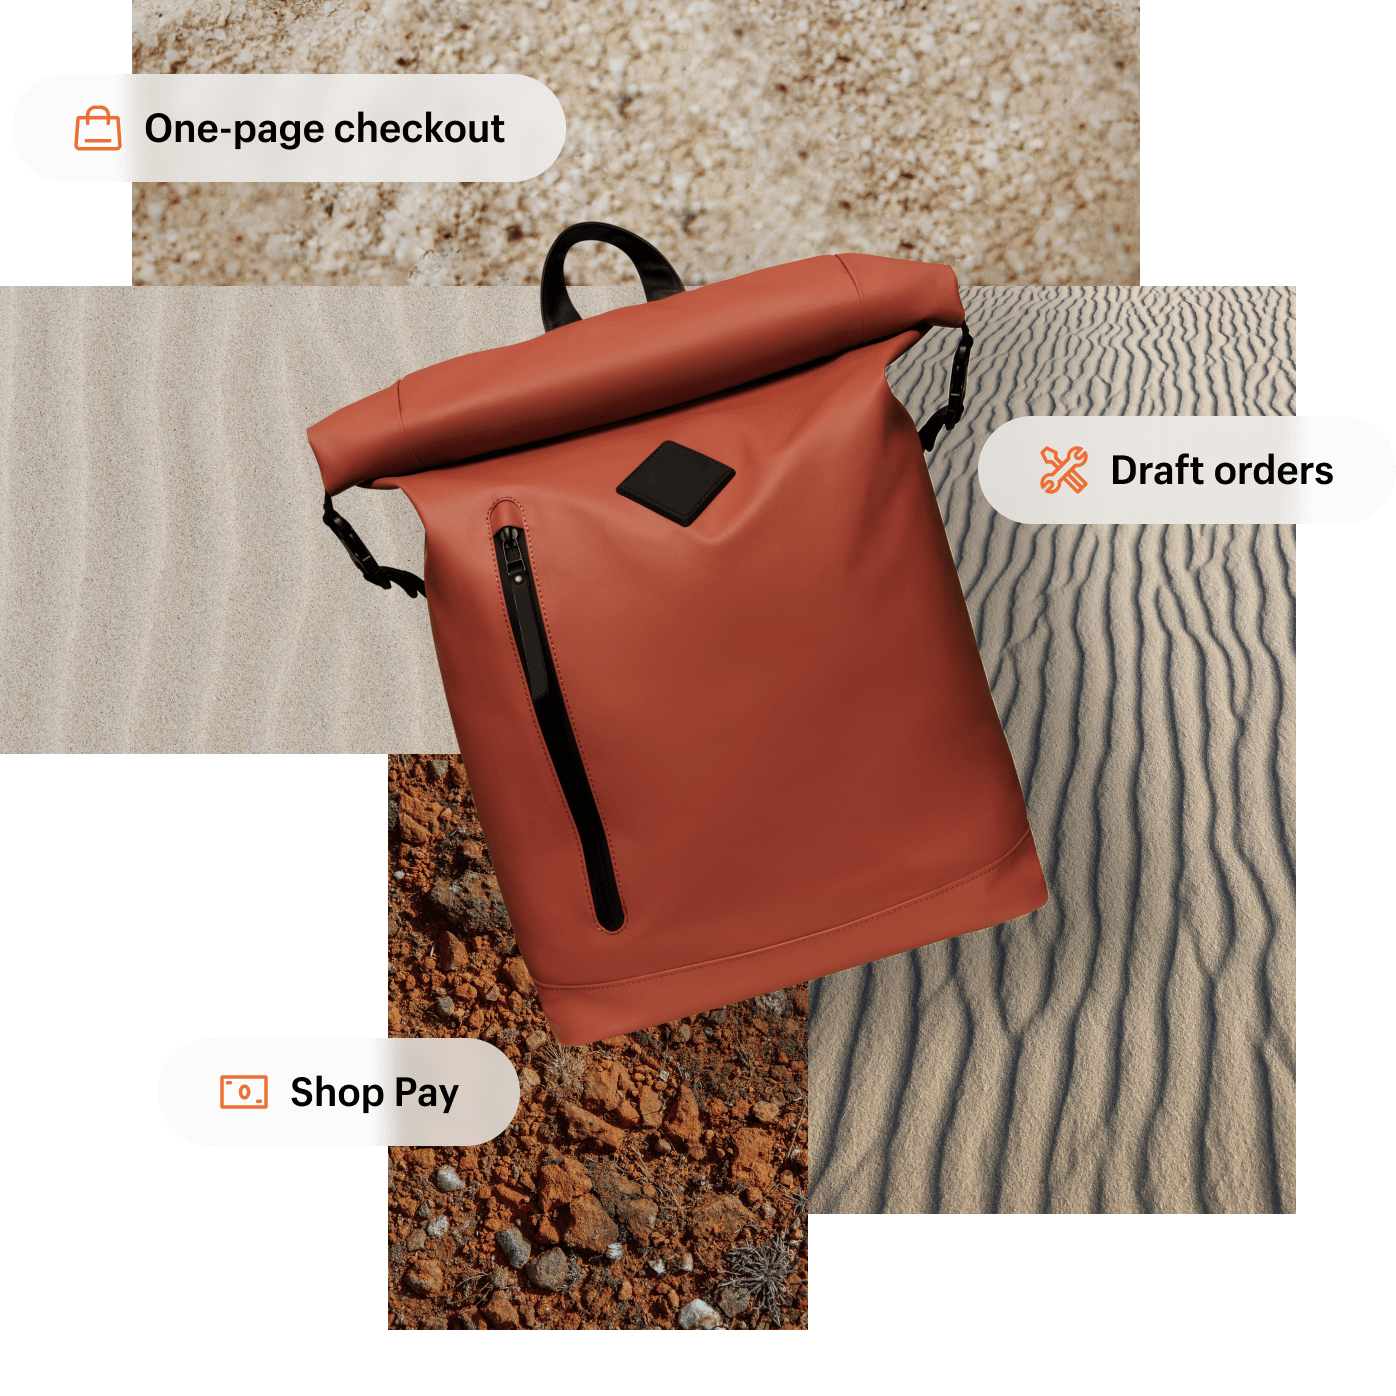 Background collage image of different textures of sand and soil, with buttons labeled 'one-page checkout', 'draft orders', and 'Shop Pay'. In the foreground is a stylish roll-top backpack in a rust colour.